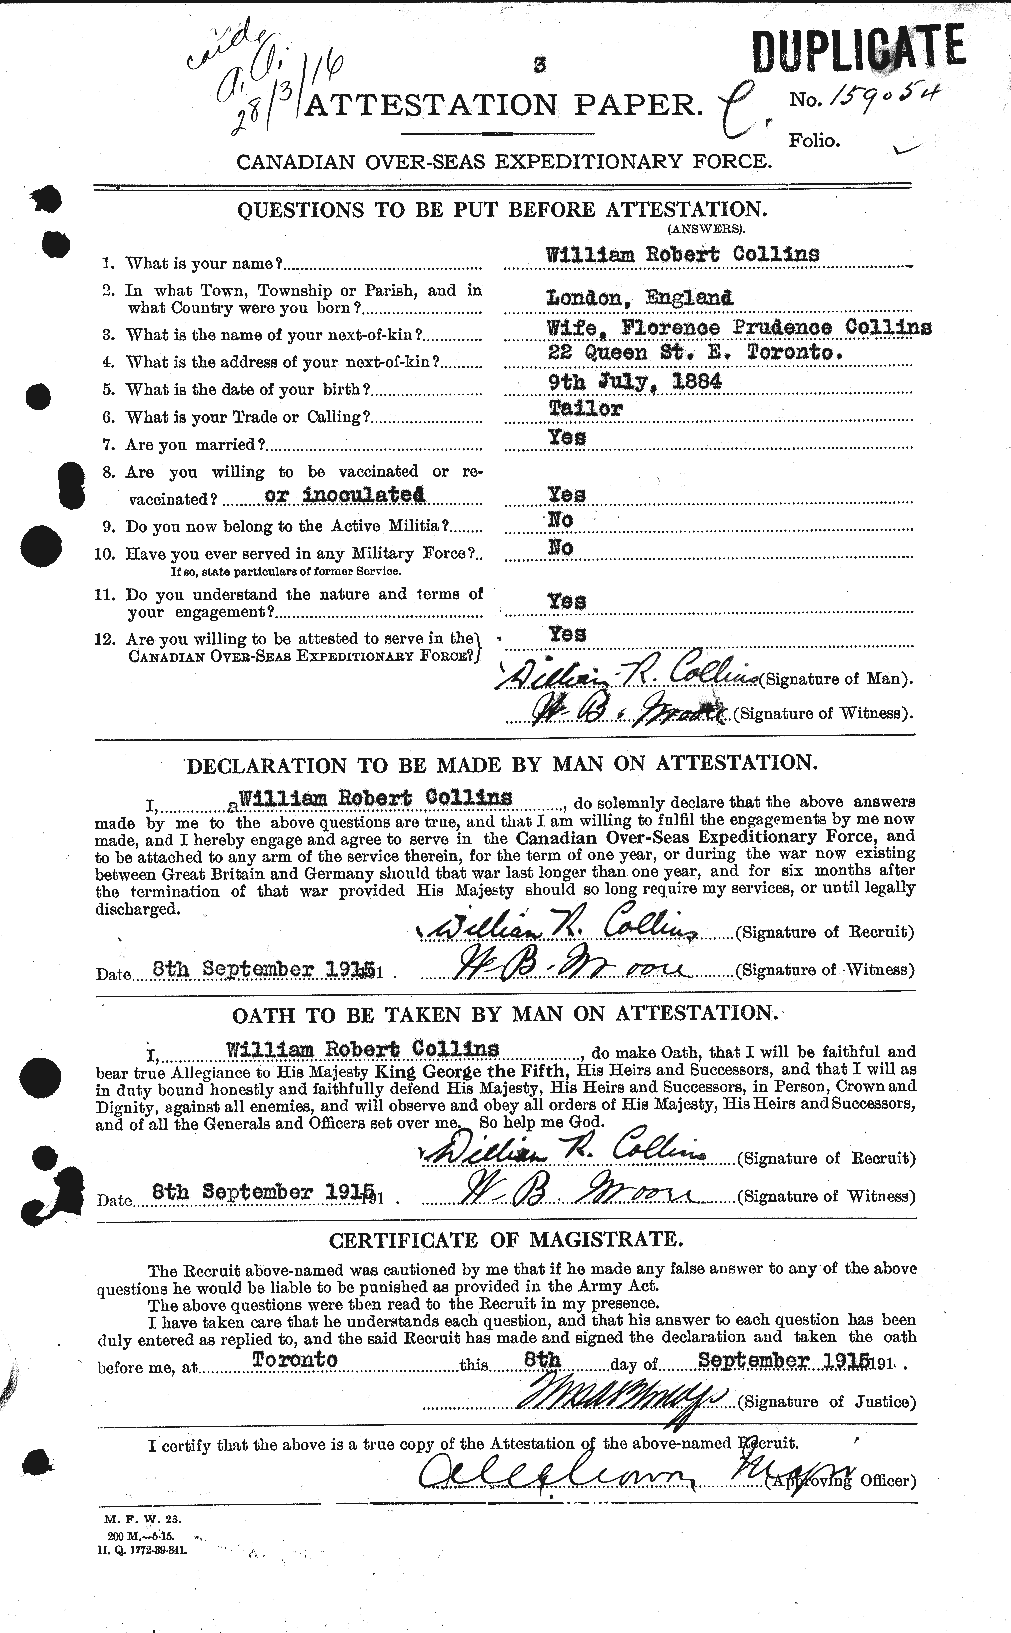 Personnel Records of the First World War - CEF 068502a